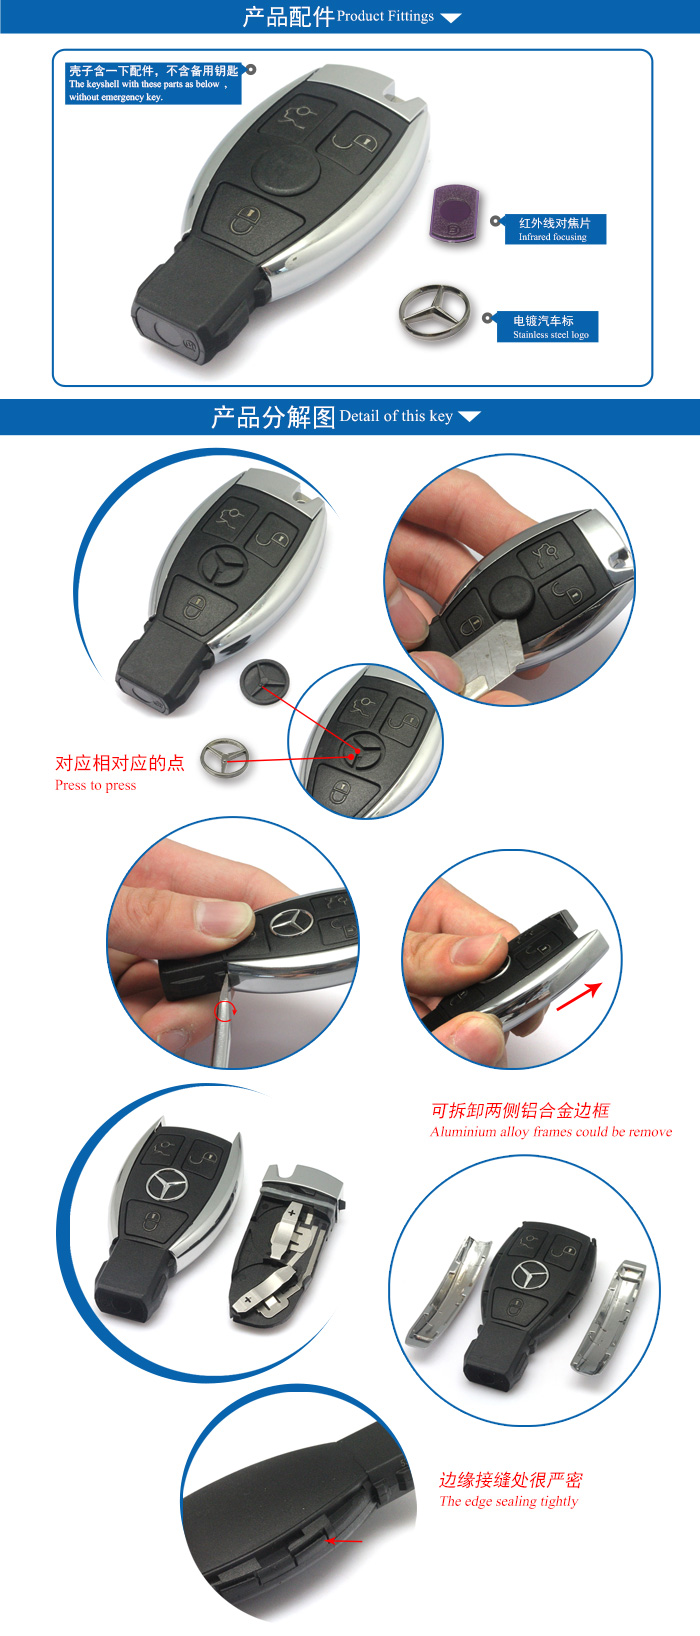 Remote Key Shell 3 Buttons for Mercedes-Benz Waterproof - 01